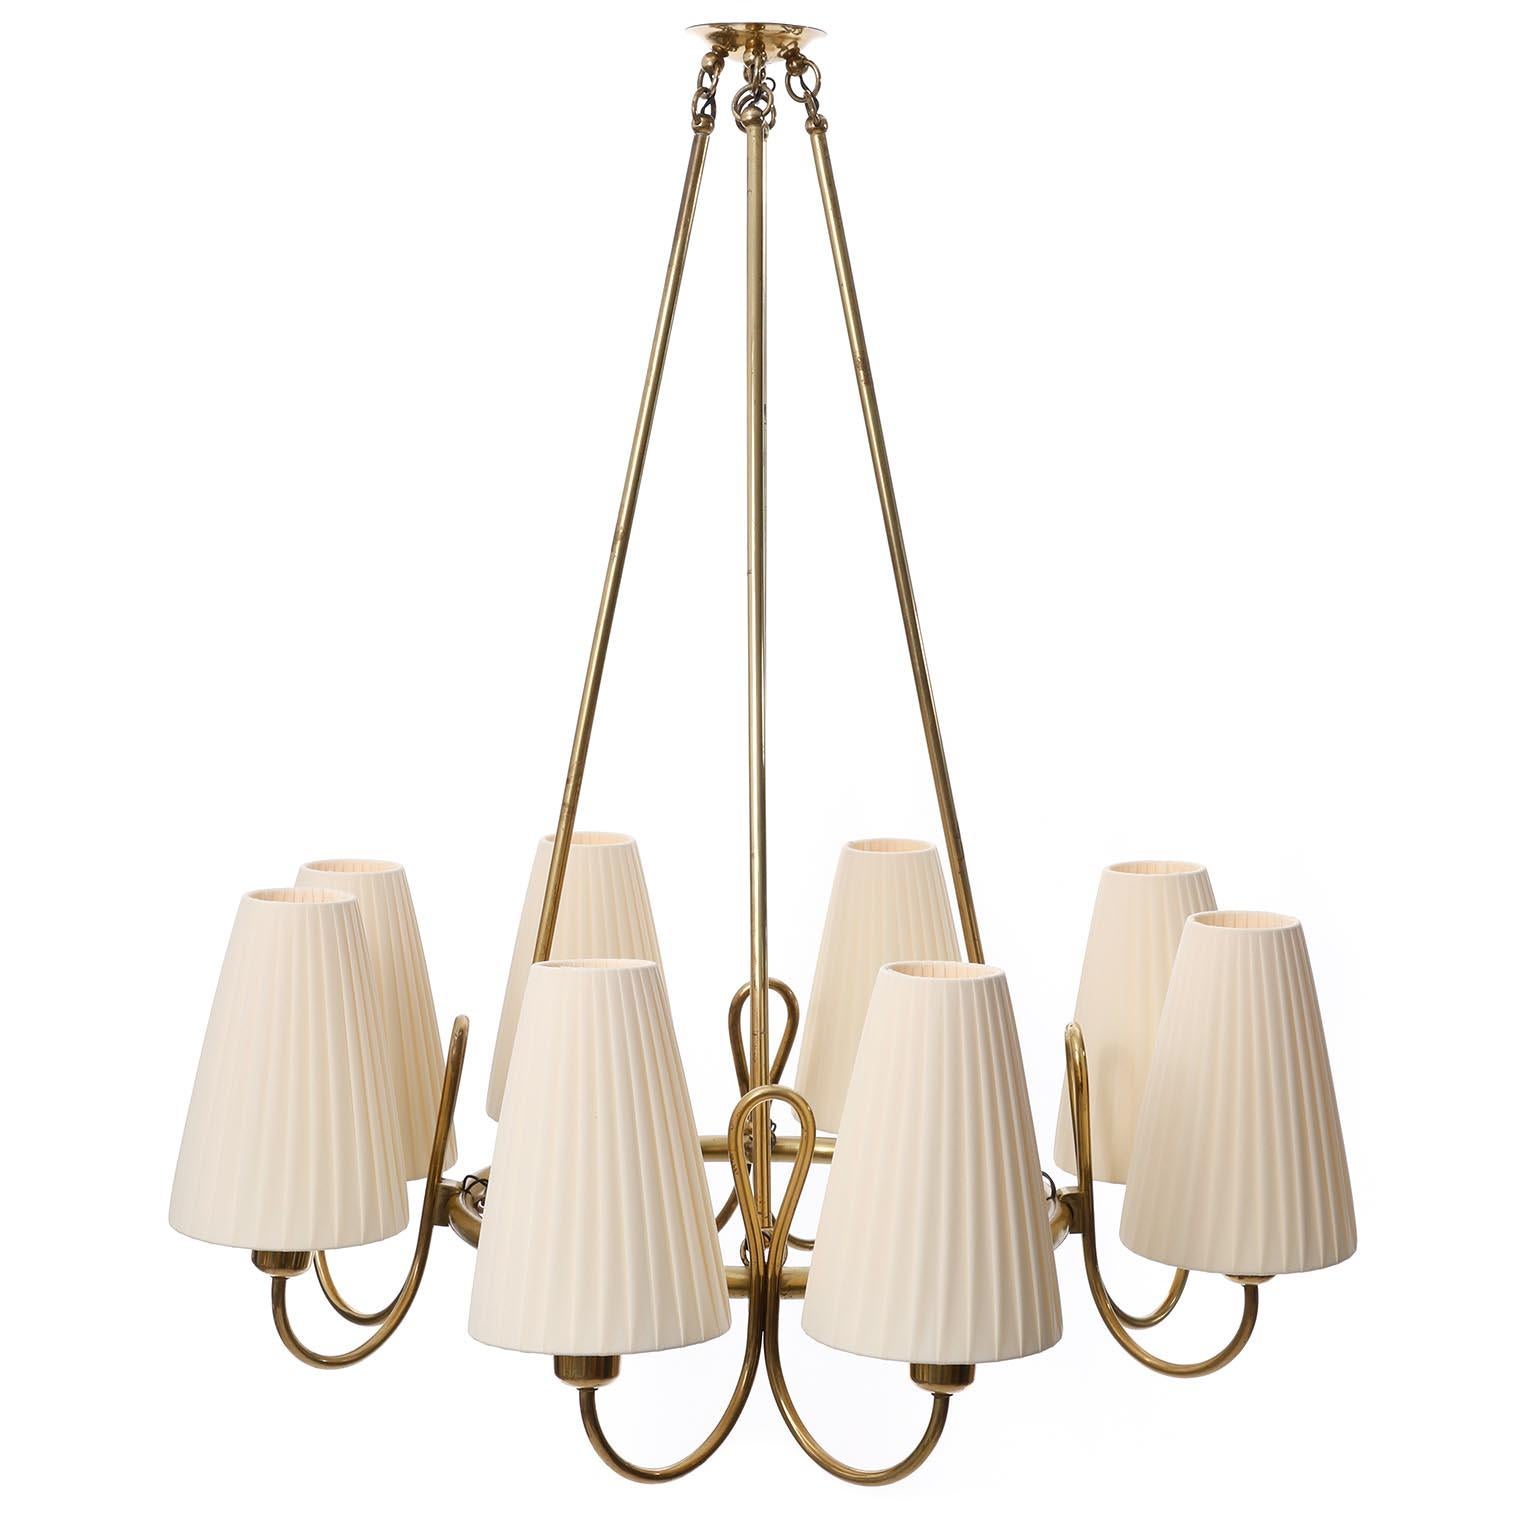 A fantastic chandelier made of brass with cream colored pleated fabric shades attributed to Josef Frank, manufactured in Austria in 1930s.
The brass parts are in very good original condition with patina and have a warm aged hue.
The lamp shades are